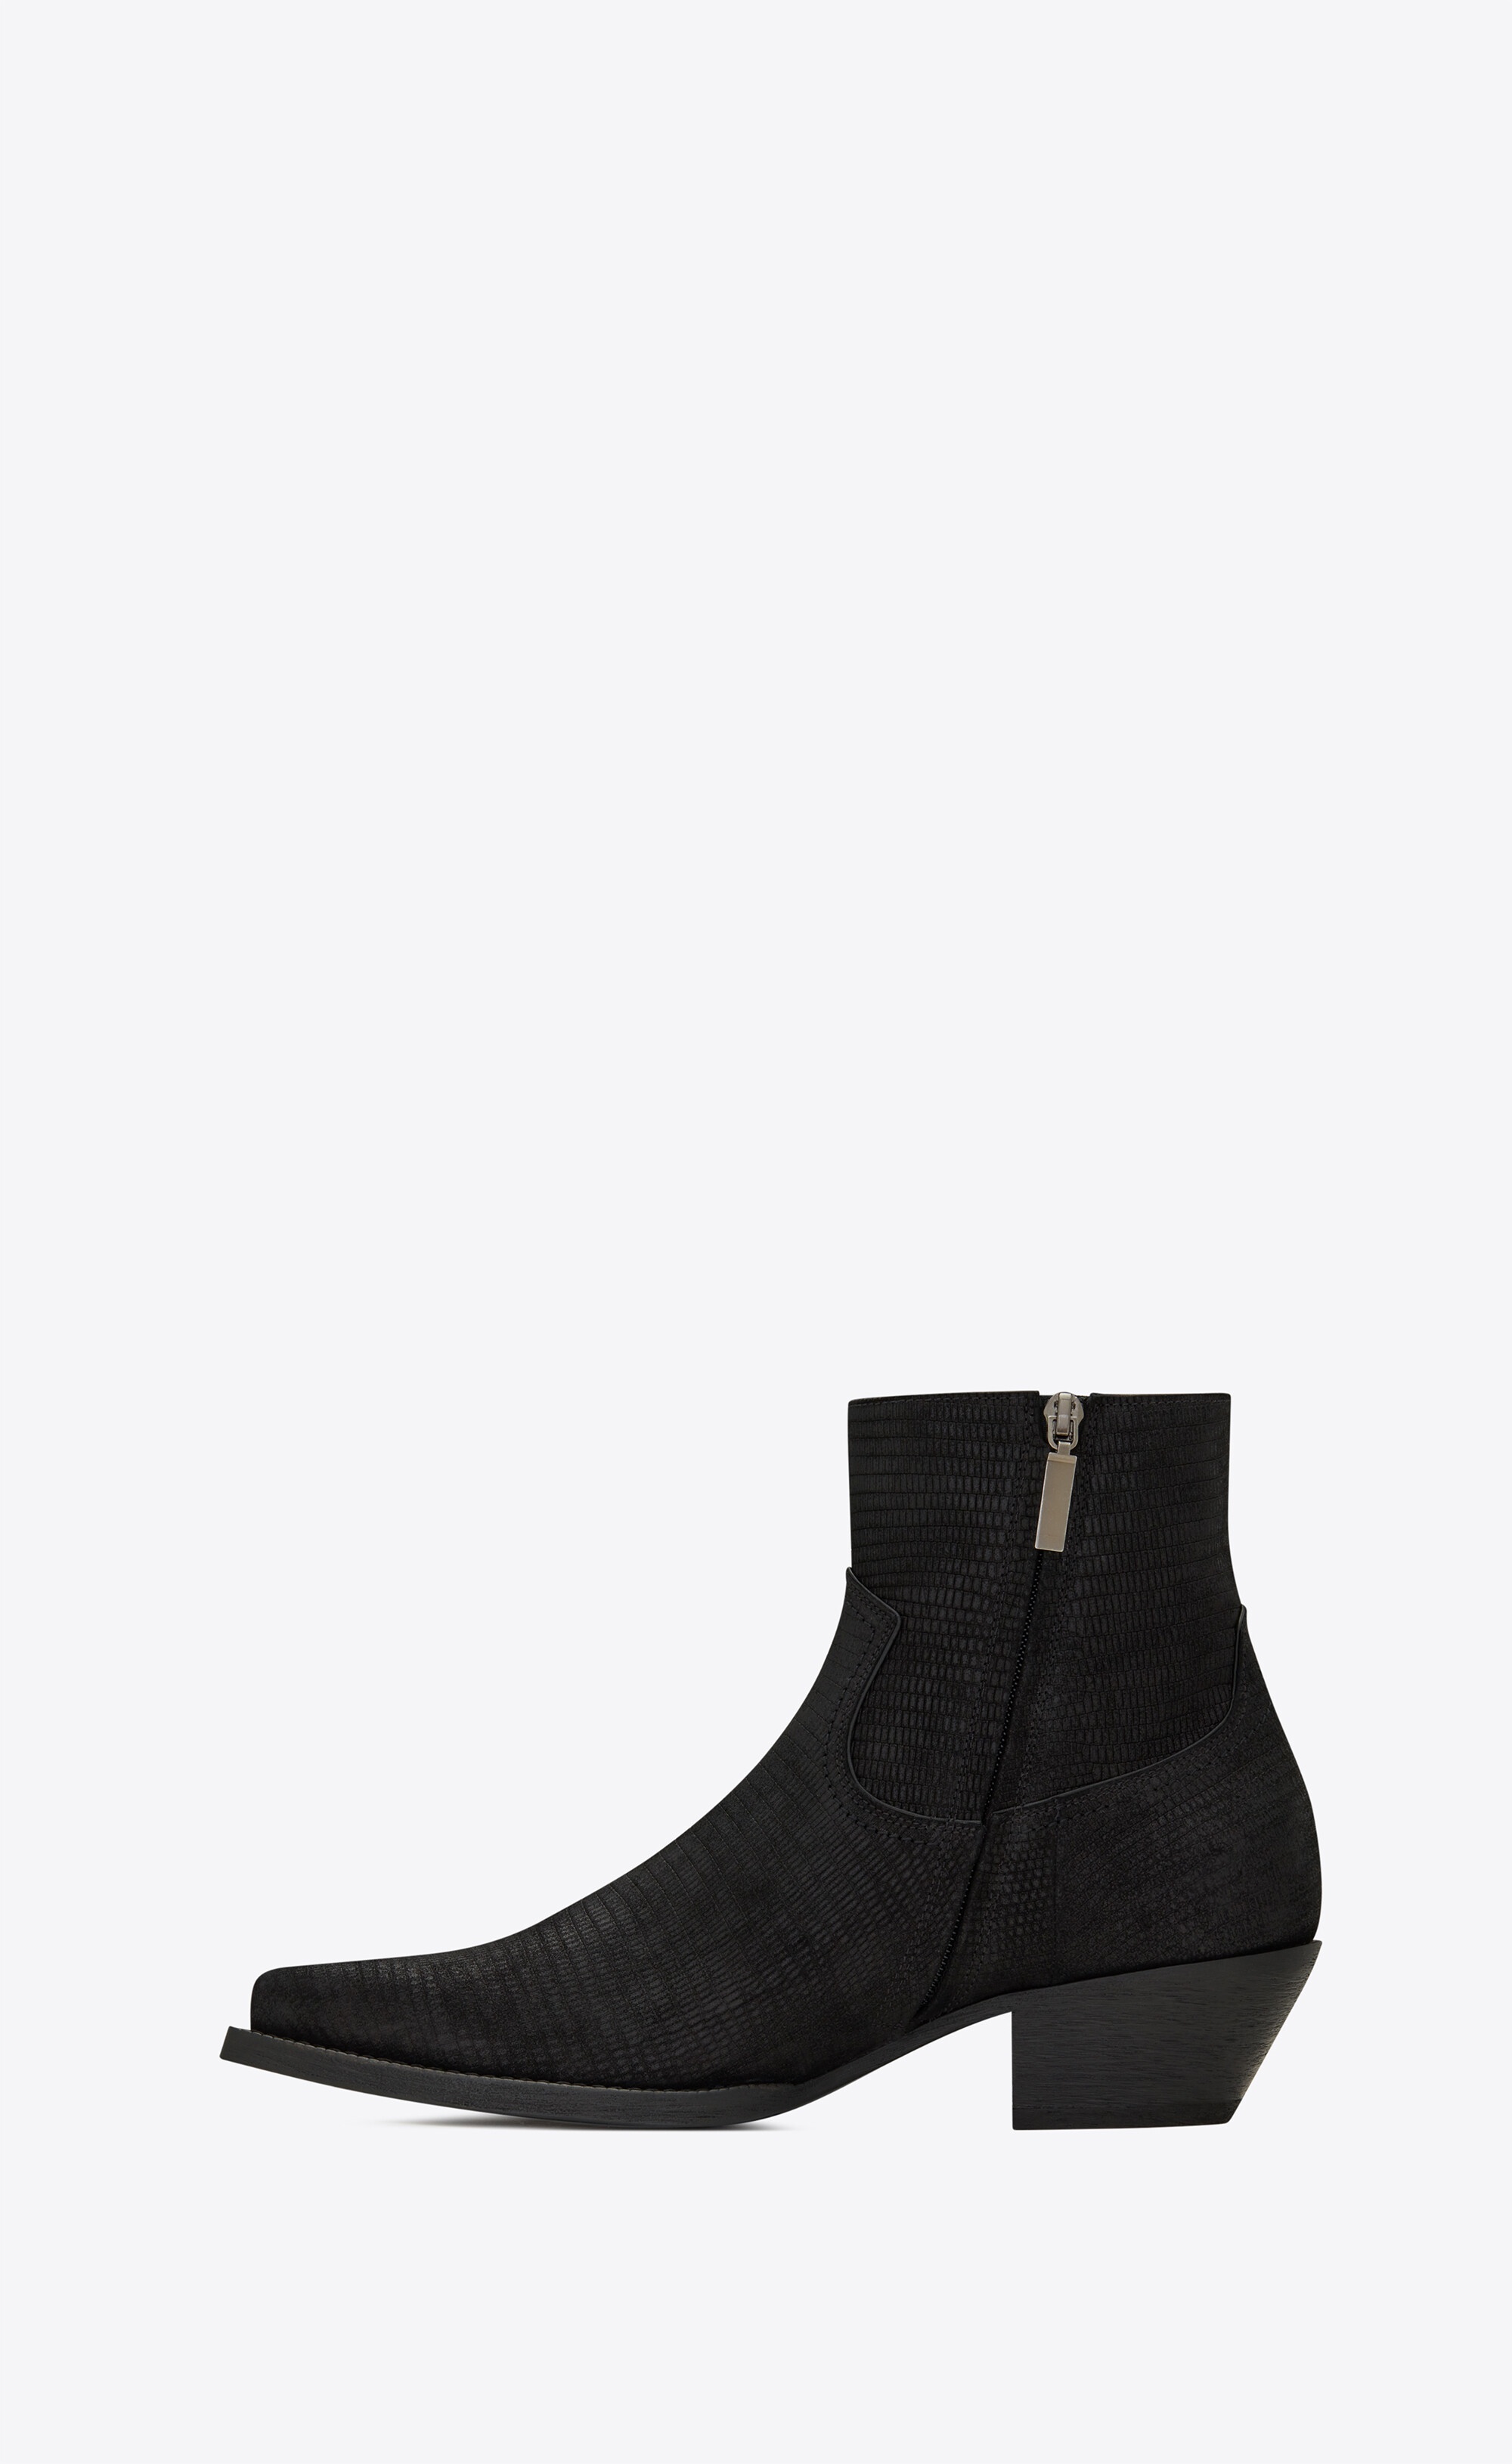 lukas western zipped boots in tejus-embossed suede - 3